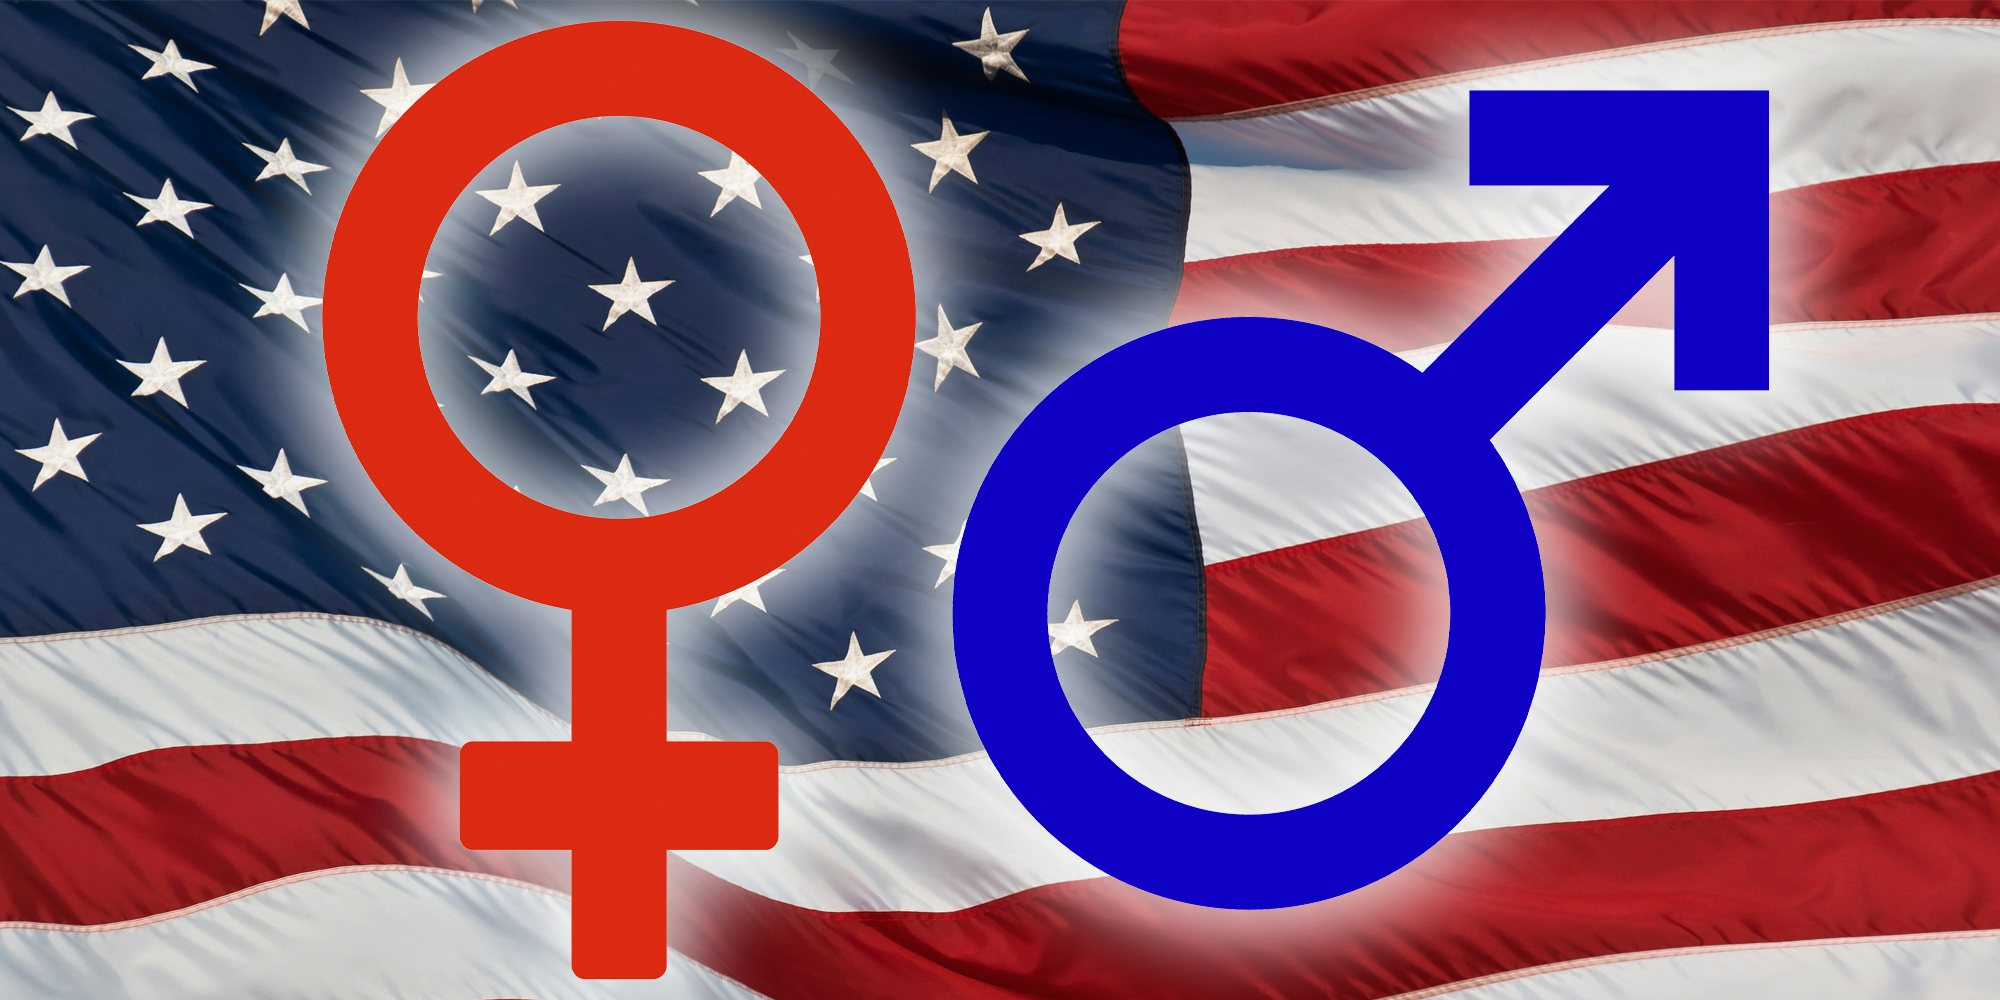 Female and Male symbols over american flag